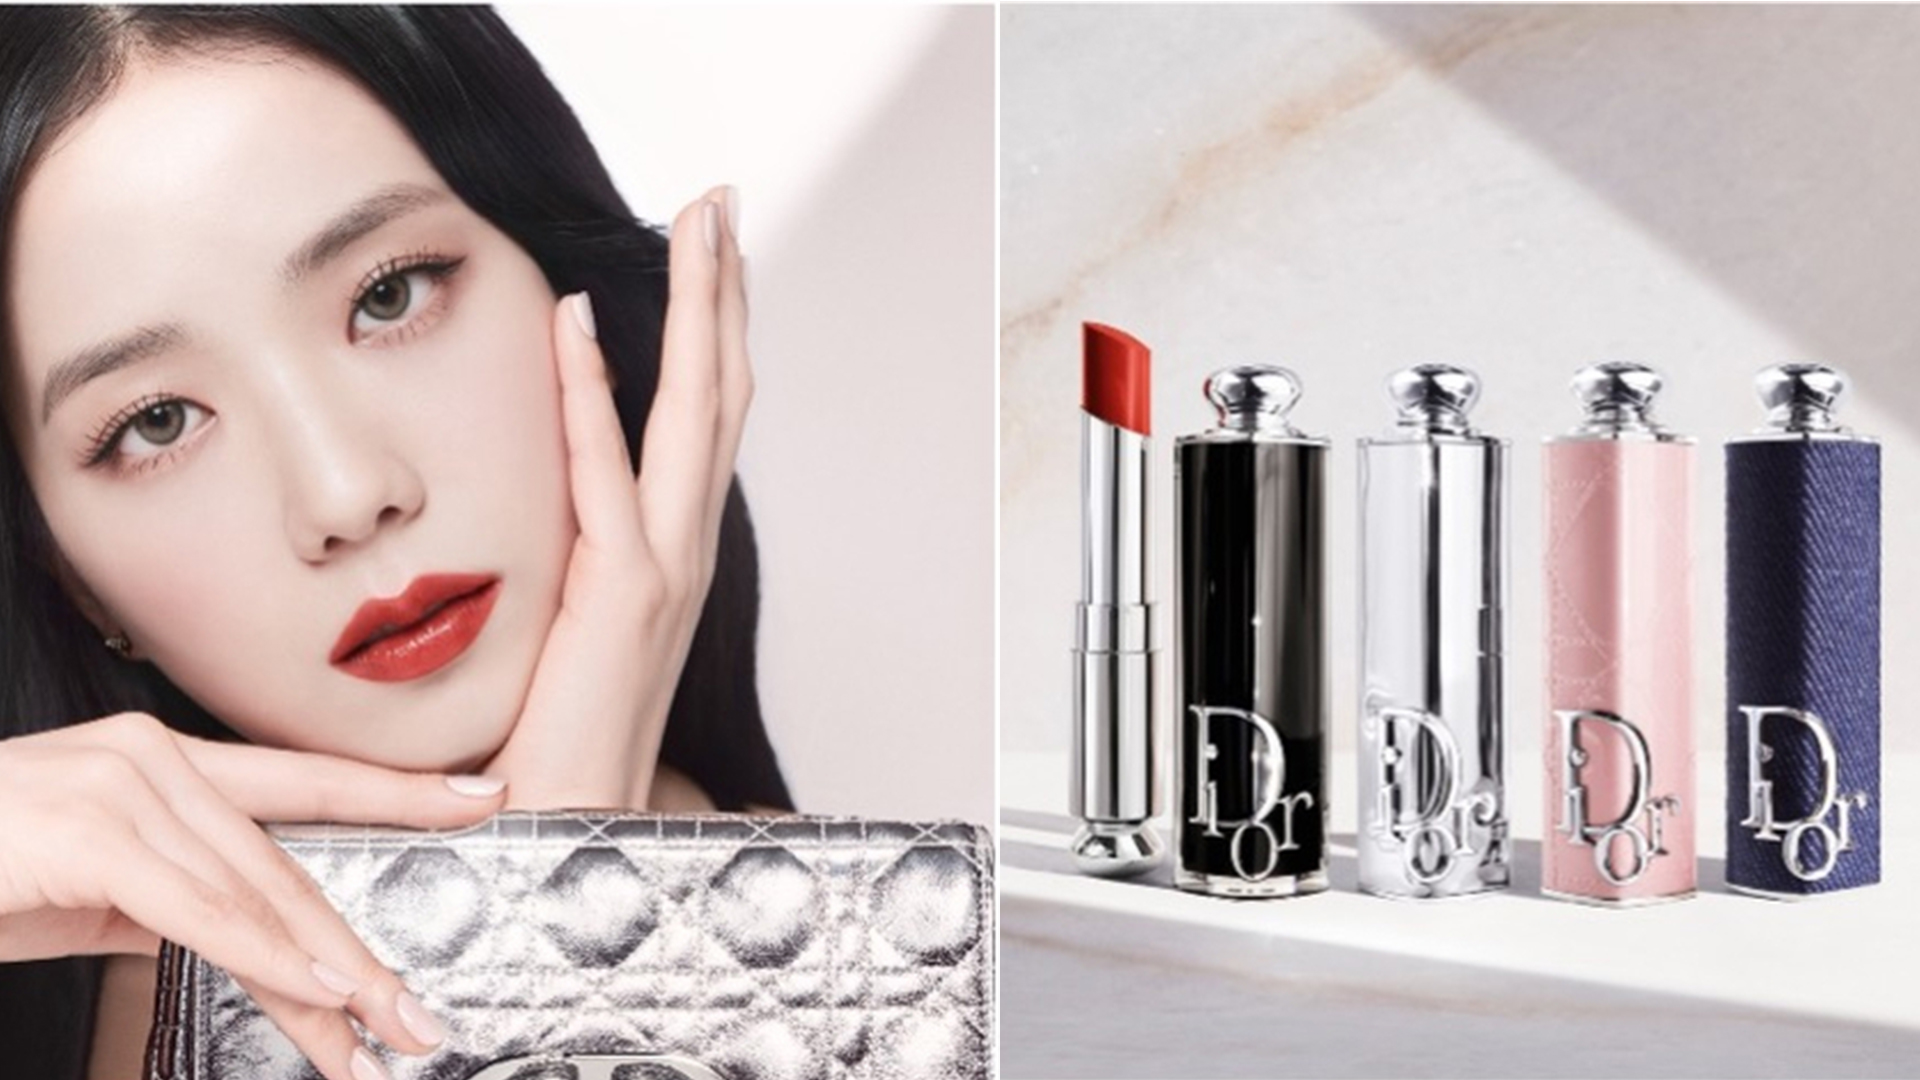 Dior Beauty launches WhatsApp campaign with Blackpink's Jisoo - TheIndustry. beauty